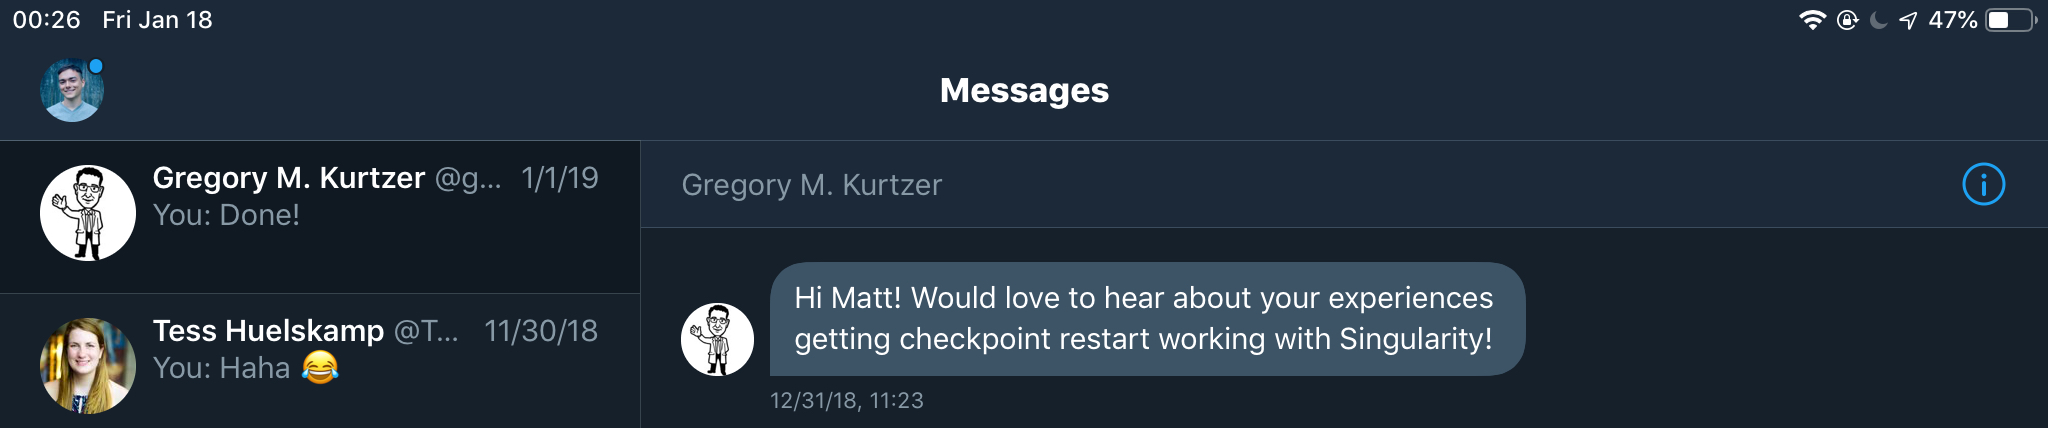 A direct message from Gregory Kurtzer.